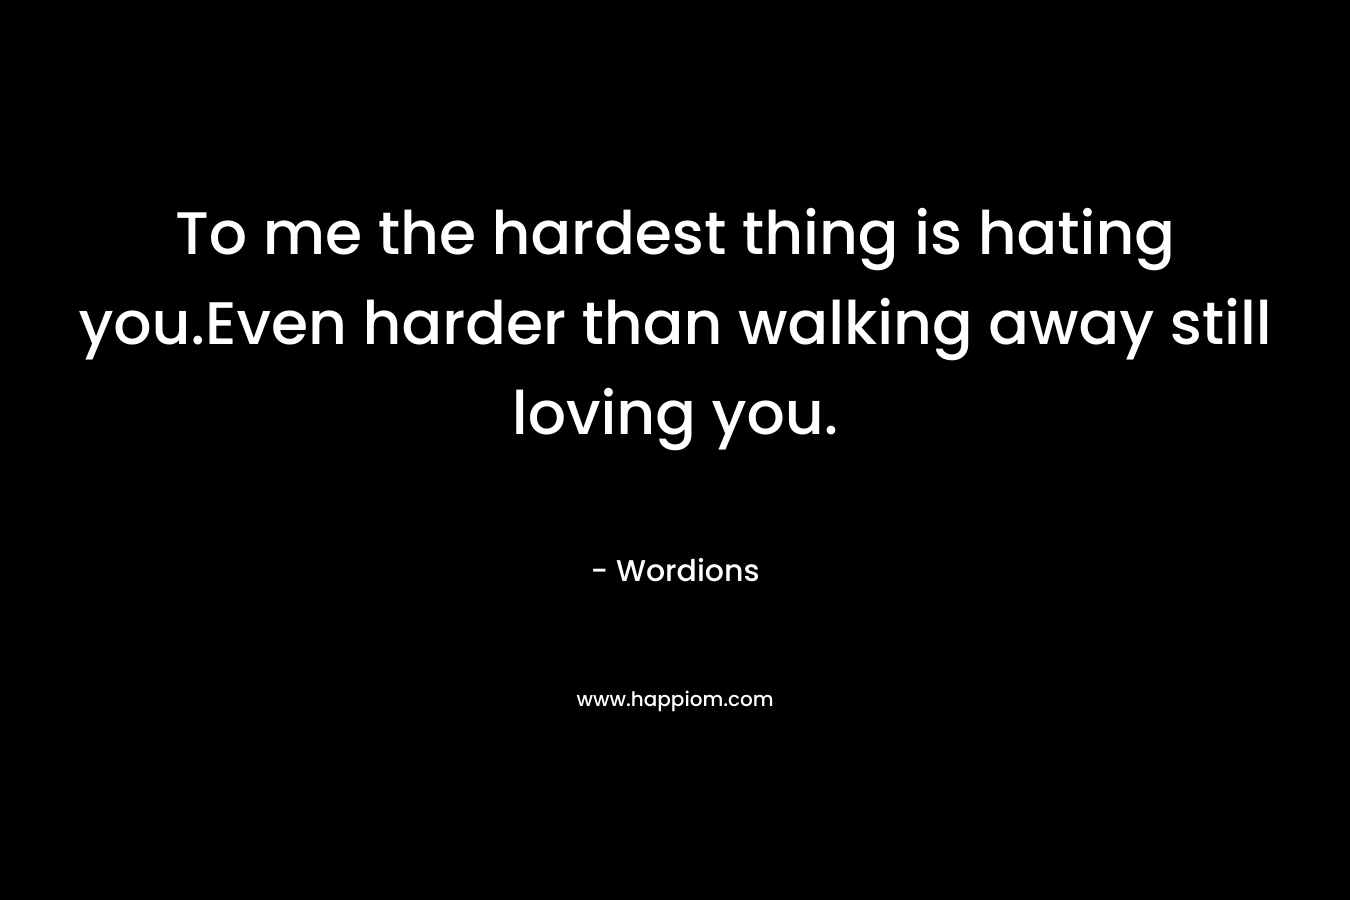 To me the hardest thing is hating you.Even harder than walking away still loving you. – Wordions